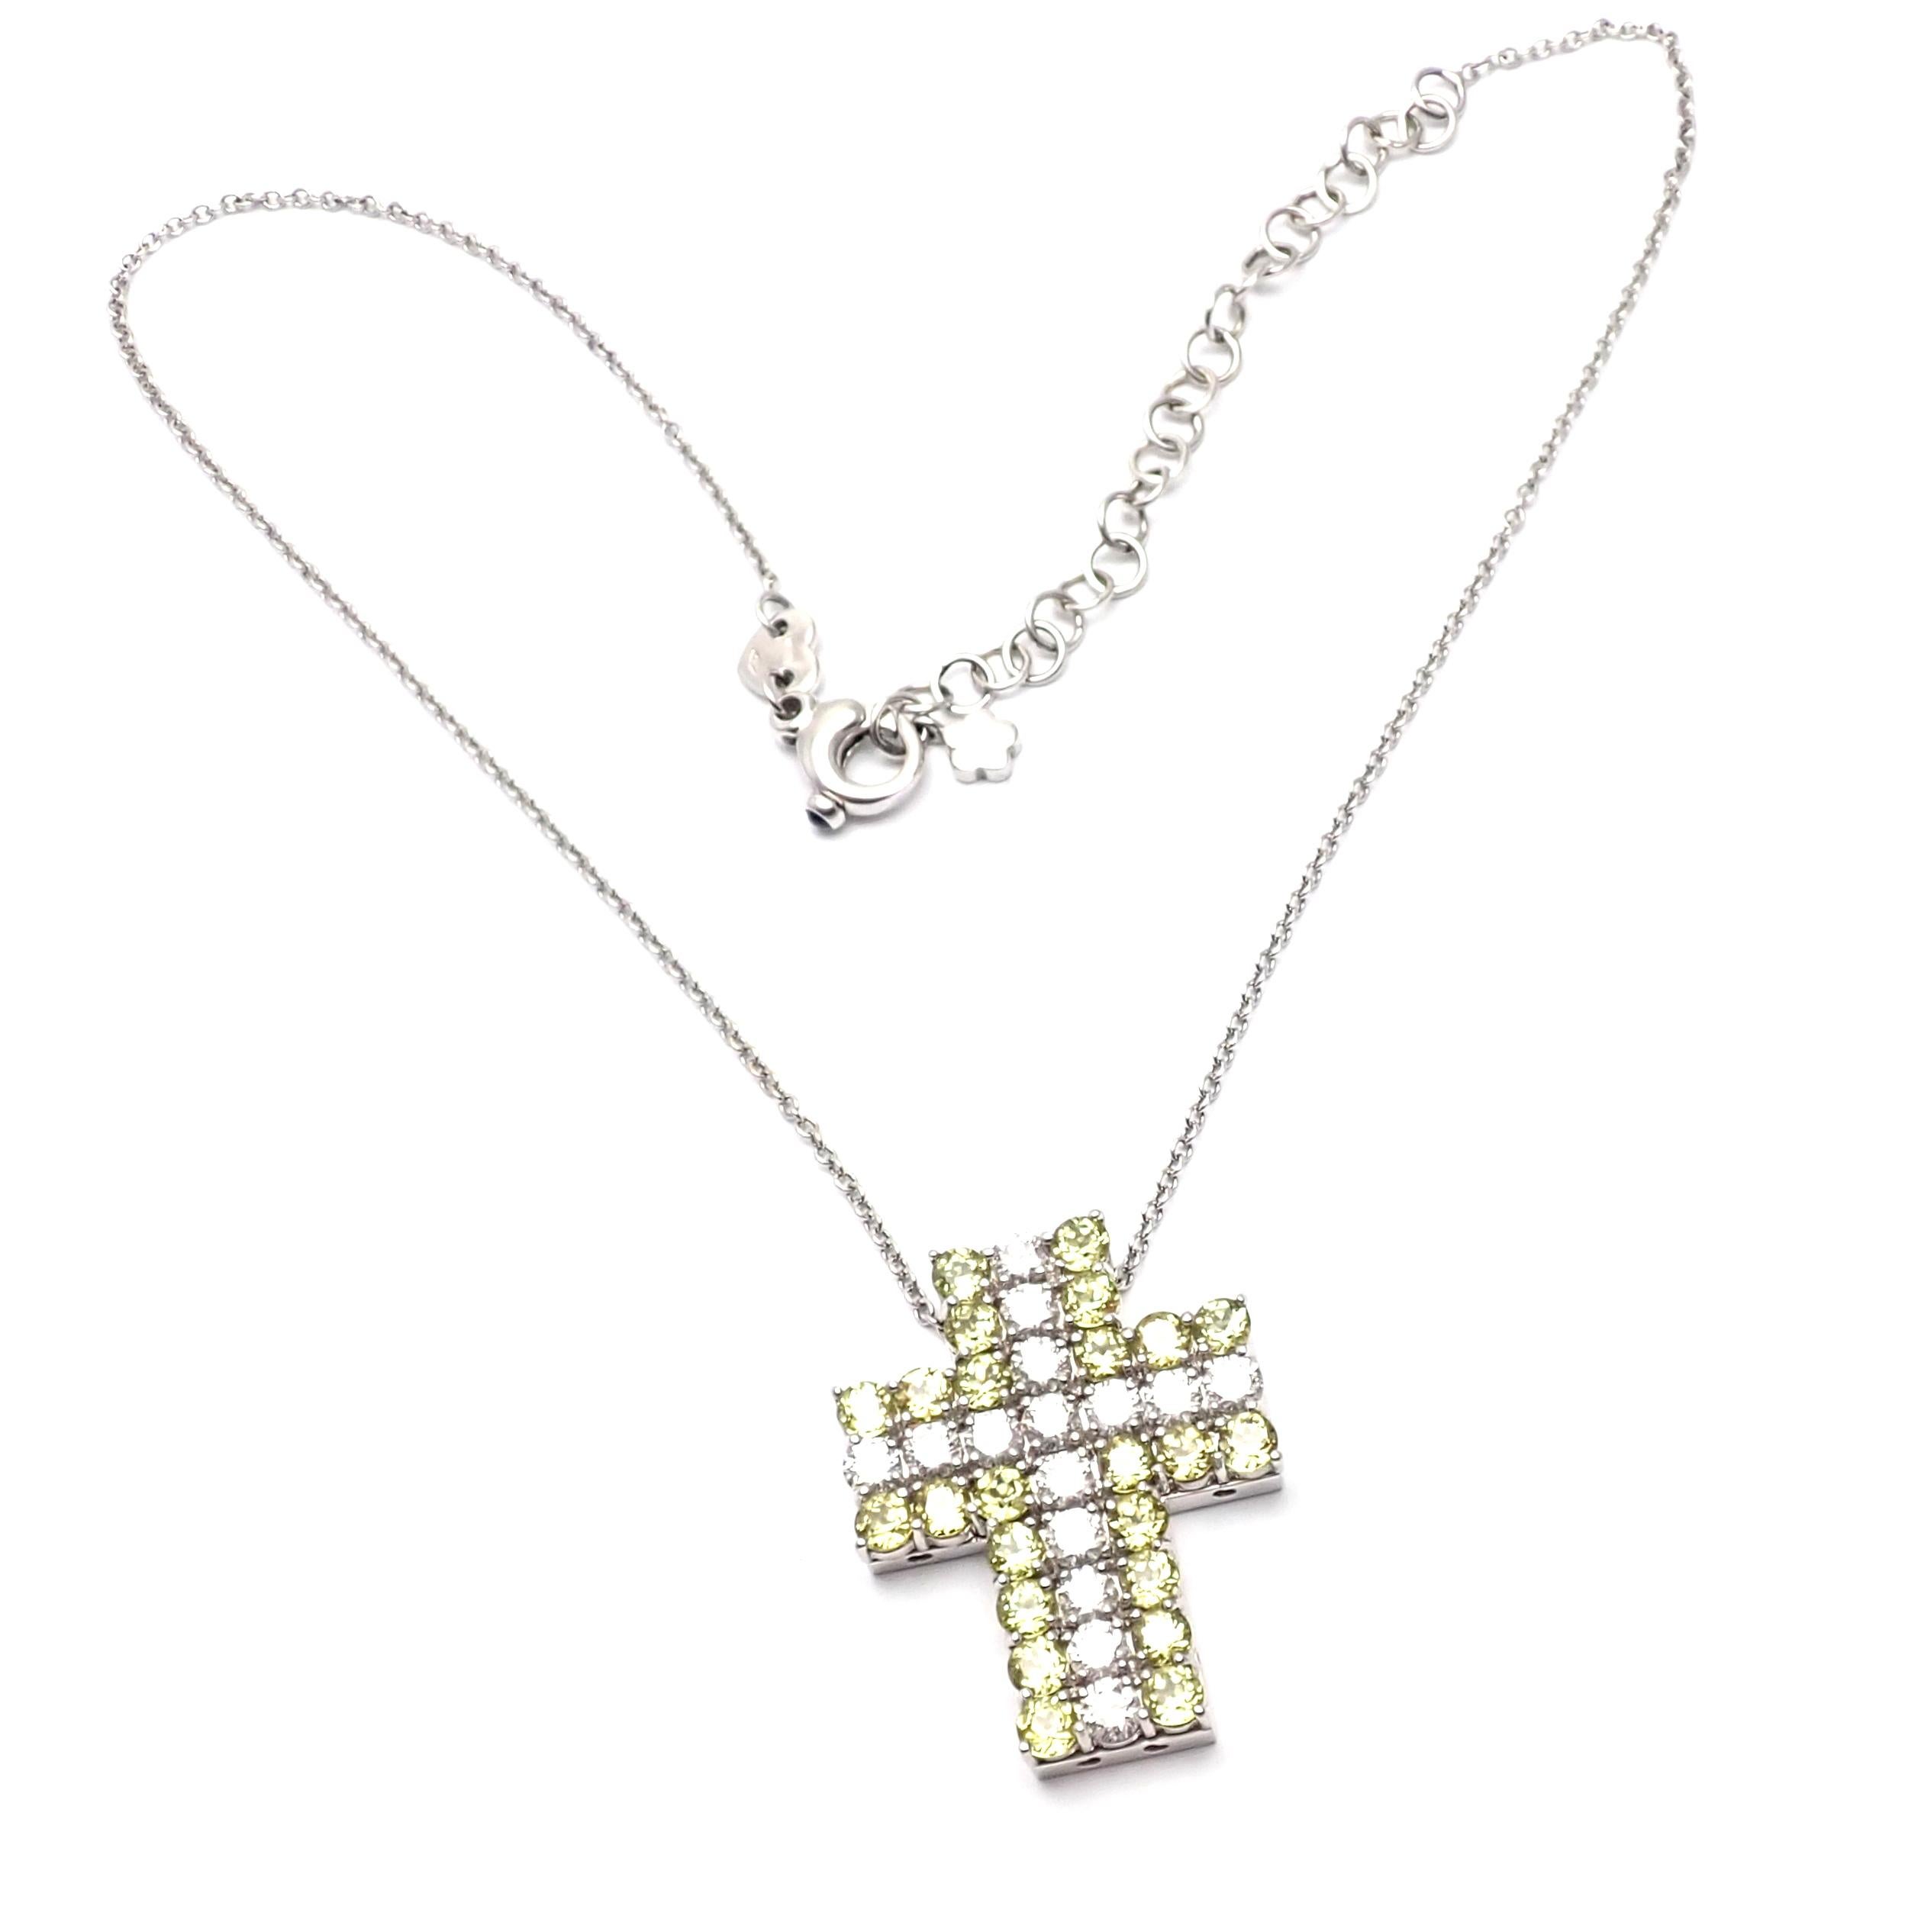 18k White Gold Diamond And Peridot Cross Pendant Necklace by Pasquale Bruni.  
With 15 round brilliant cut diamonds total weight approx. 2.6ct 
26 Peridots
This necklace comes with Box And Certificate.   
Details:  
Length: 16